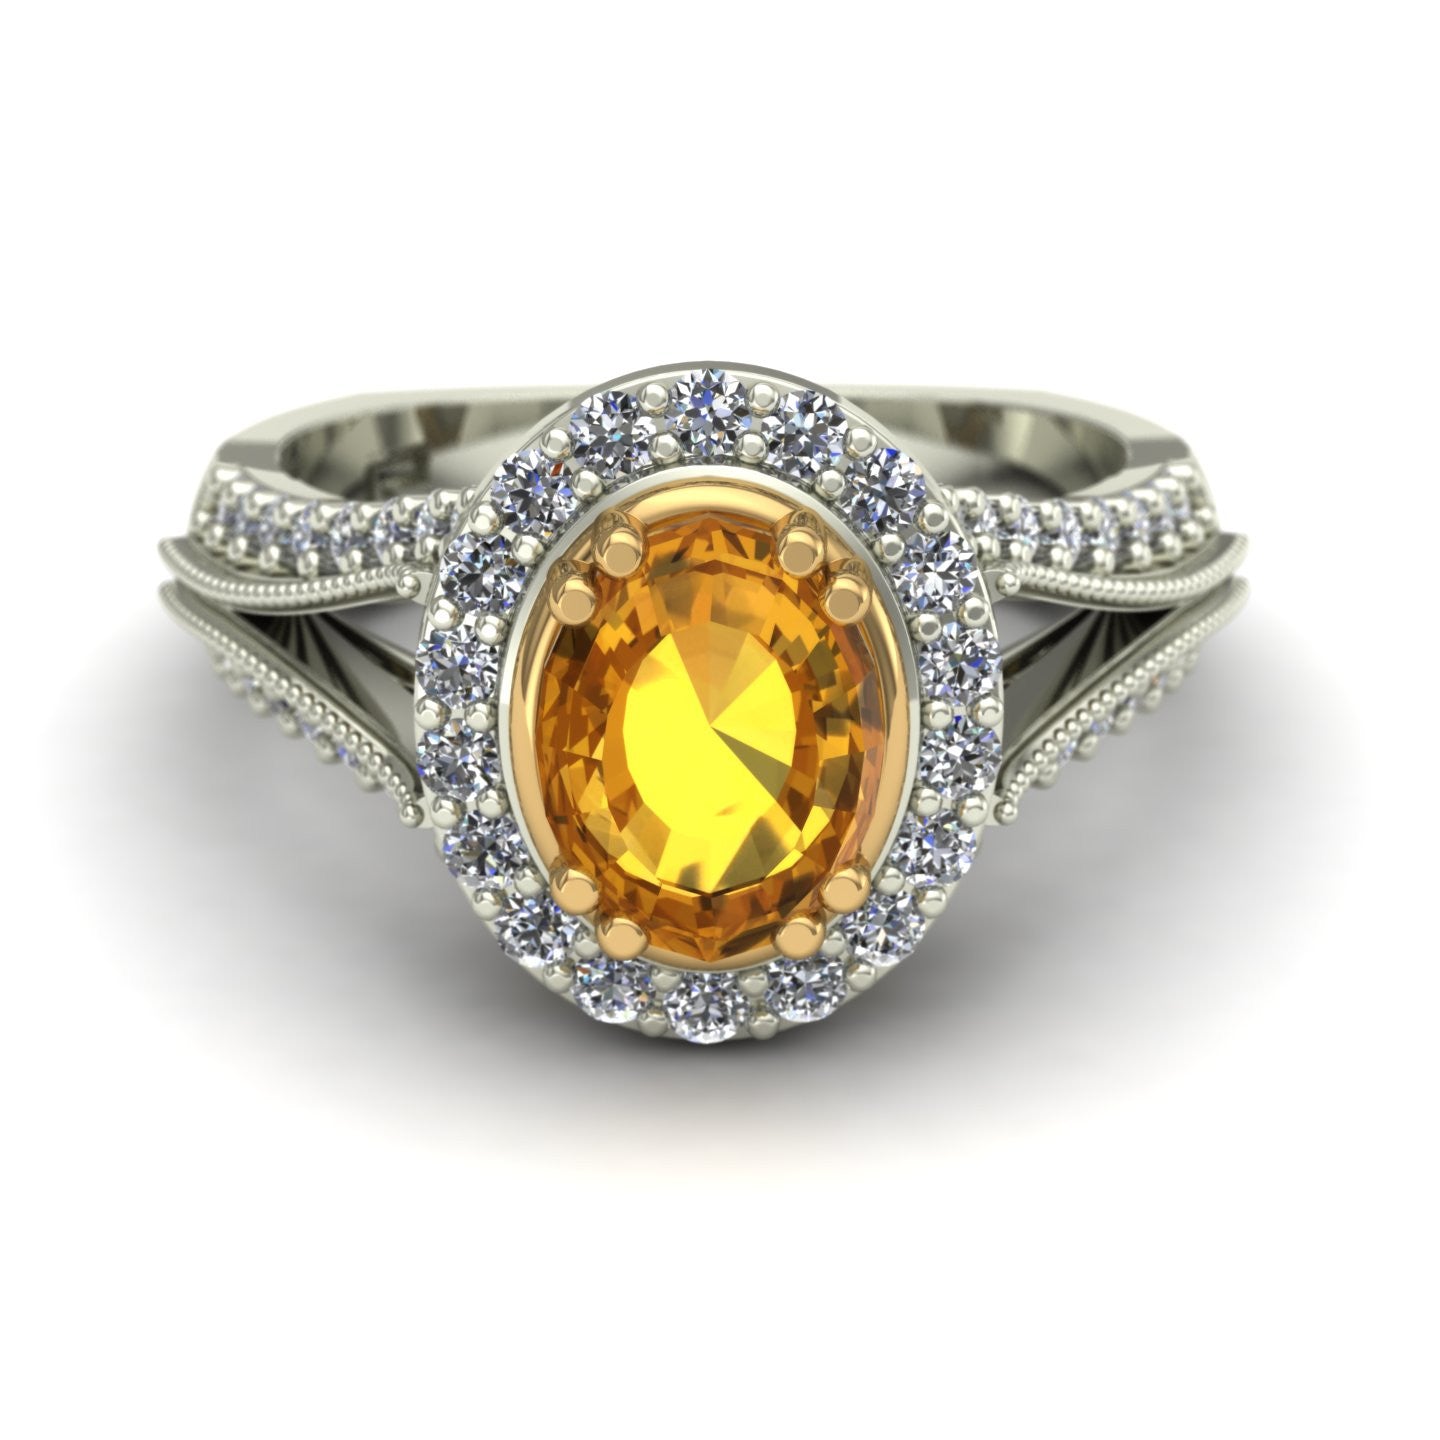 Yellow sapphire and diamond oval scroll ring in 14k yellow and white gold - Charles Babb Designs
 - 3